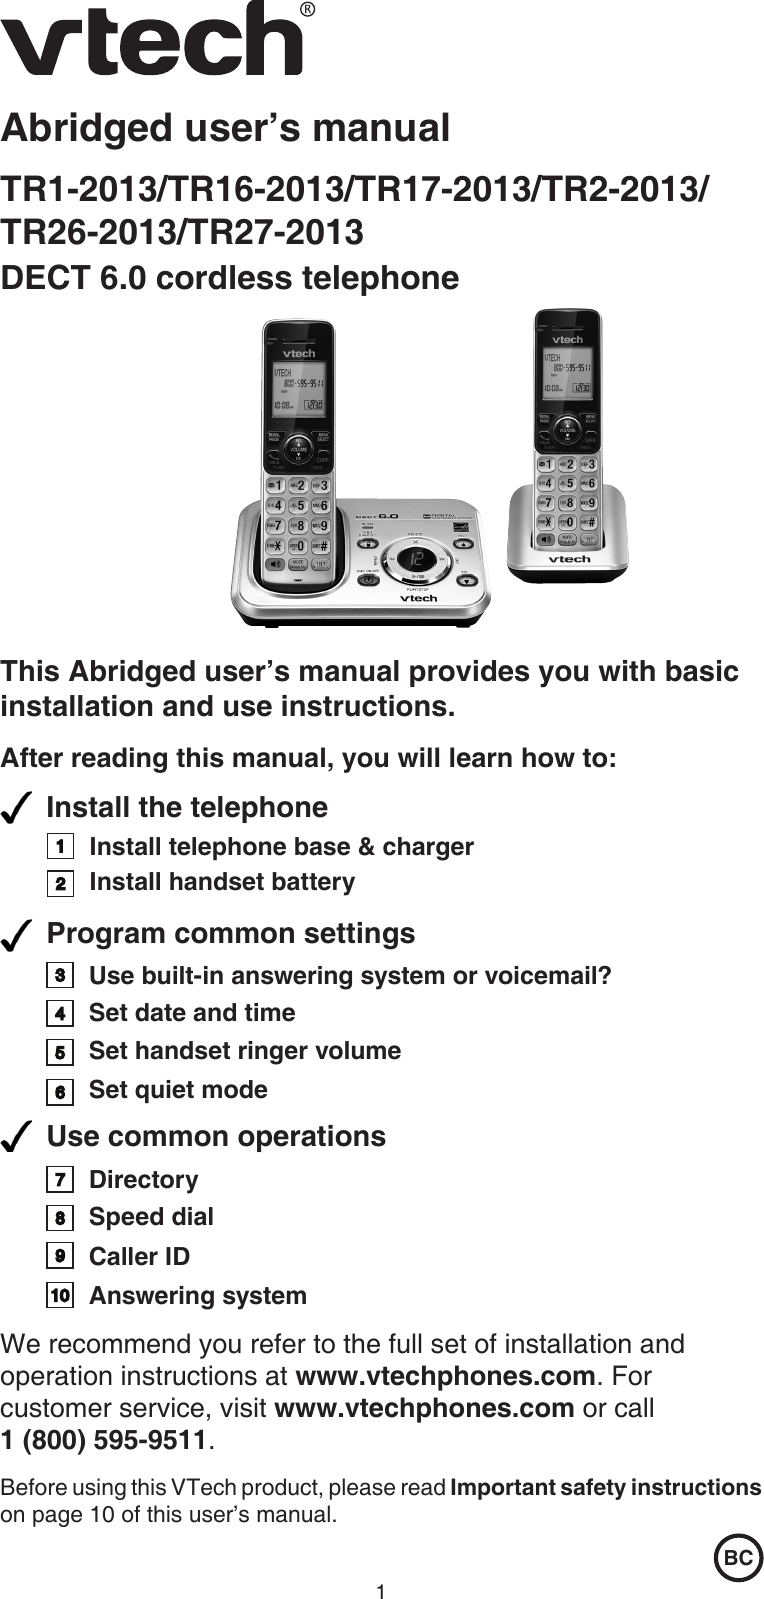 1Abridged user’s manualTR1-2013/TR16-2013/TR17-2013/TR2-2013/ TR26-2013/TR27-2013DECT 6.0 cordless telephoneThis Abridged user’s manual provides you with basic installation and use instructions.After reading this manual, you will learn how to:BCInstall the telephone Install telephone base &amp; chargerInstall handset battery 45Set date and timeProgram common settingsSet handset ringer volume Use common operationsDirectorySpeed dial Caller ID  32176Set quiet mode9810We recommend you refer to the full set of installation and operation instructions at www.vtechphones.com. For customer service, visit www.vtechphones.com or call  1 (800) 595-9511.Before using this VTech product, please read Important safety instructions on page 10 of this user’s manual.Answering systemUse built-in answering system or voicemail?